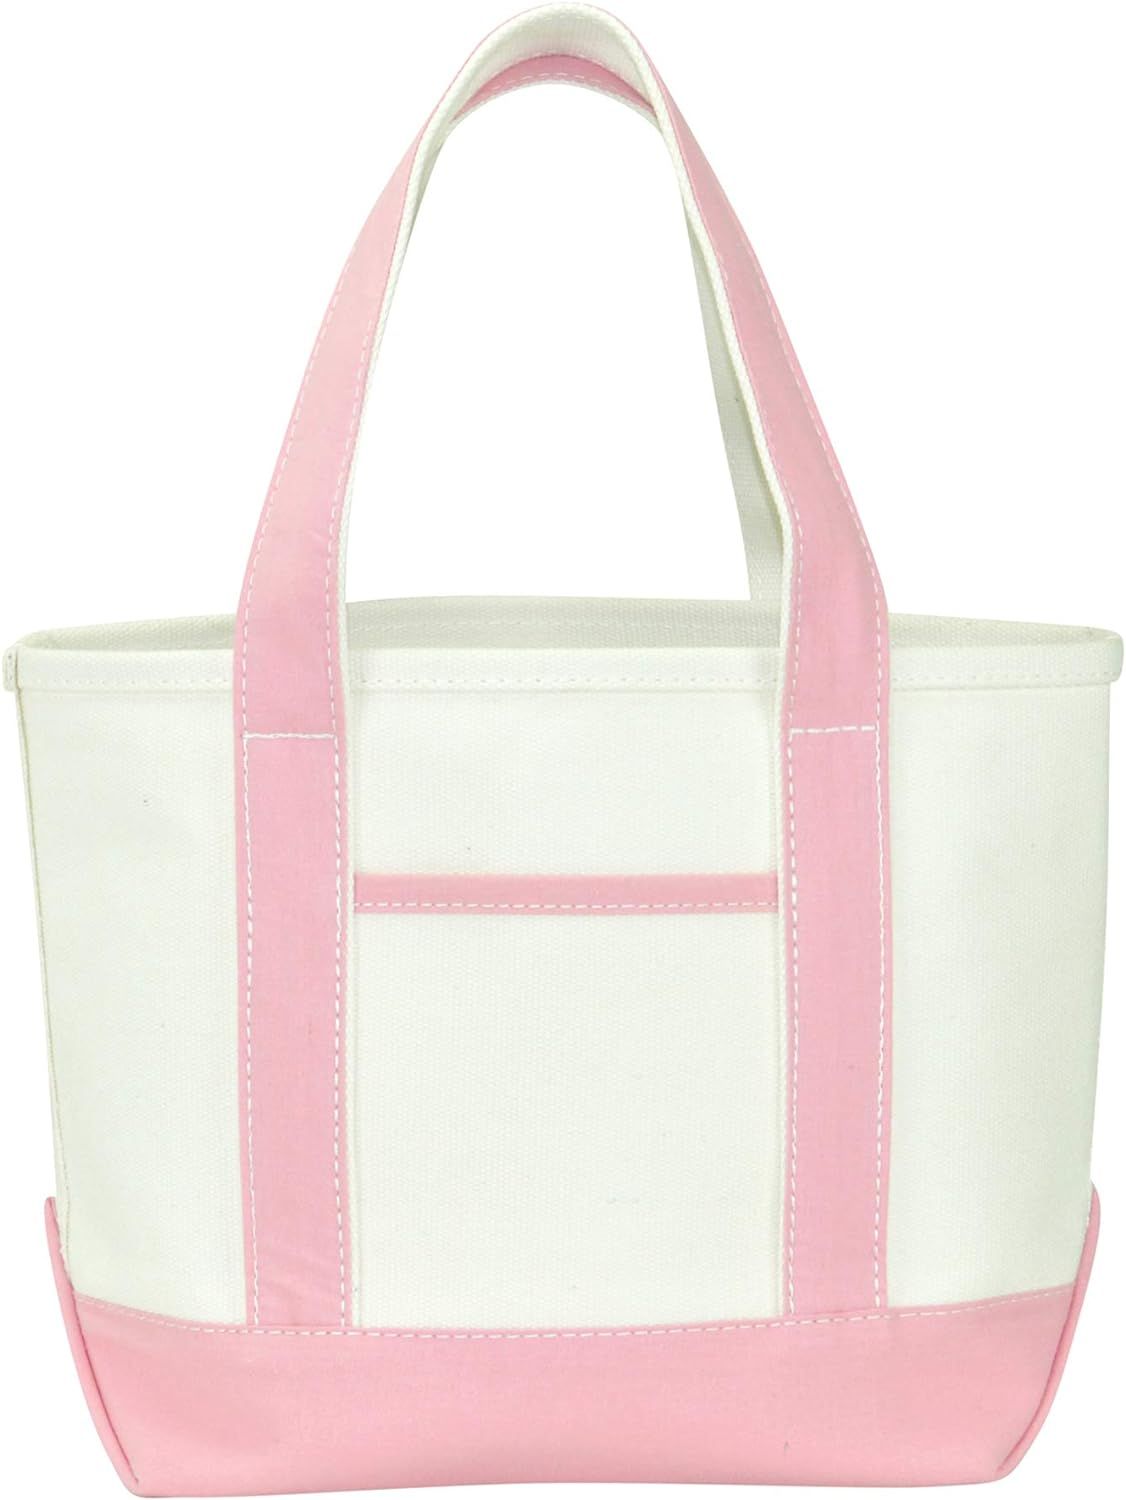 DALIX 14" Mini Small Cotton Canvas Party Favor Wedding Gift Tote Bag in Pink | Amazon (US)